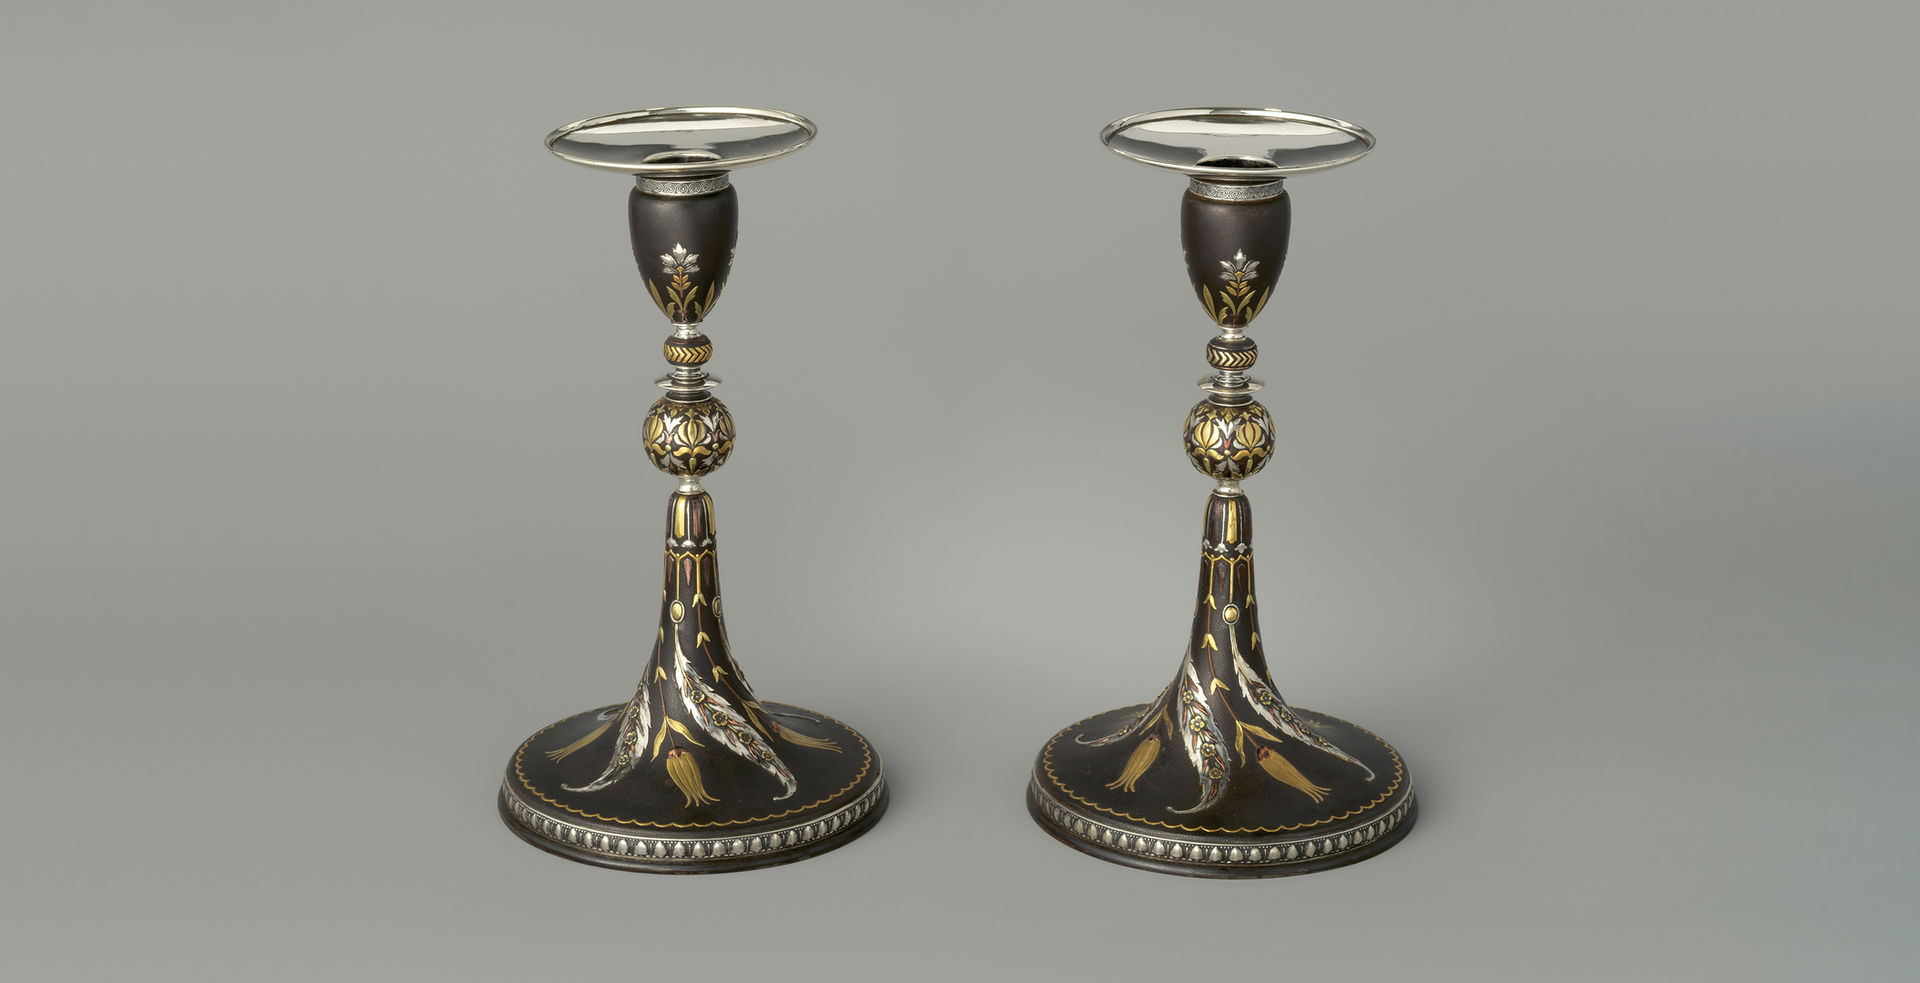 A pair of black iron candlesticks with a tapered conical base appear side-by-side. They are adorned with various sinuous floral motives that are modeled in low relief on the surface and surfaced in a variety of silver-, gold-, and copper-toned metals.